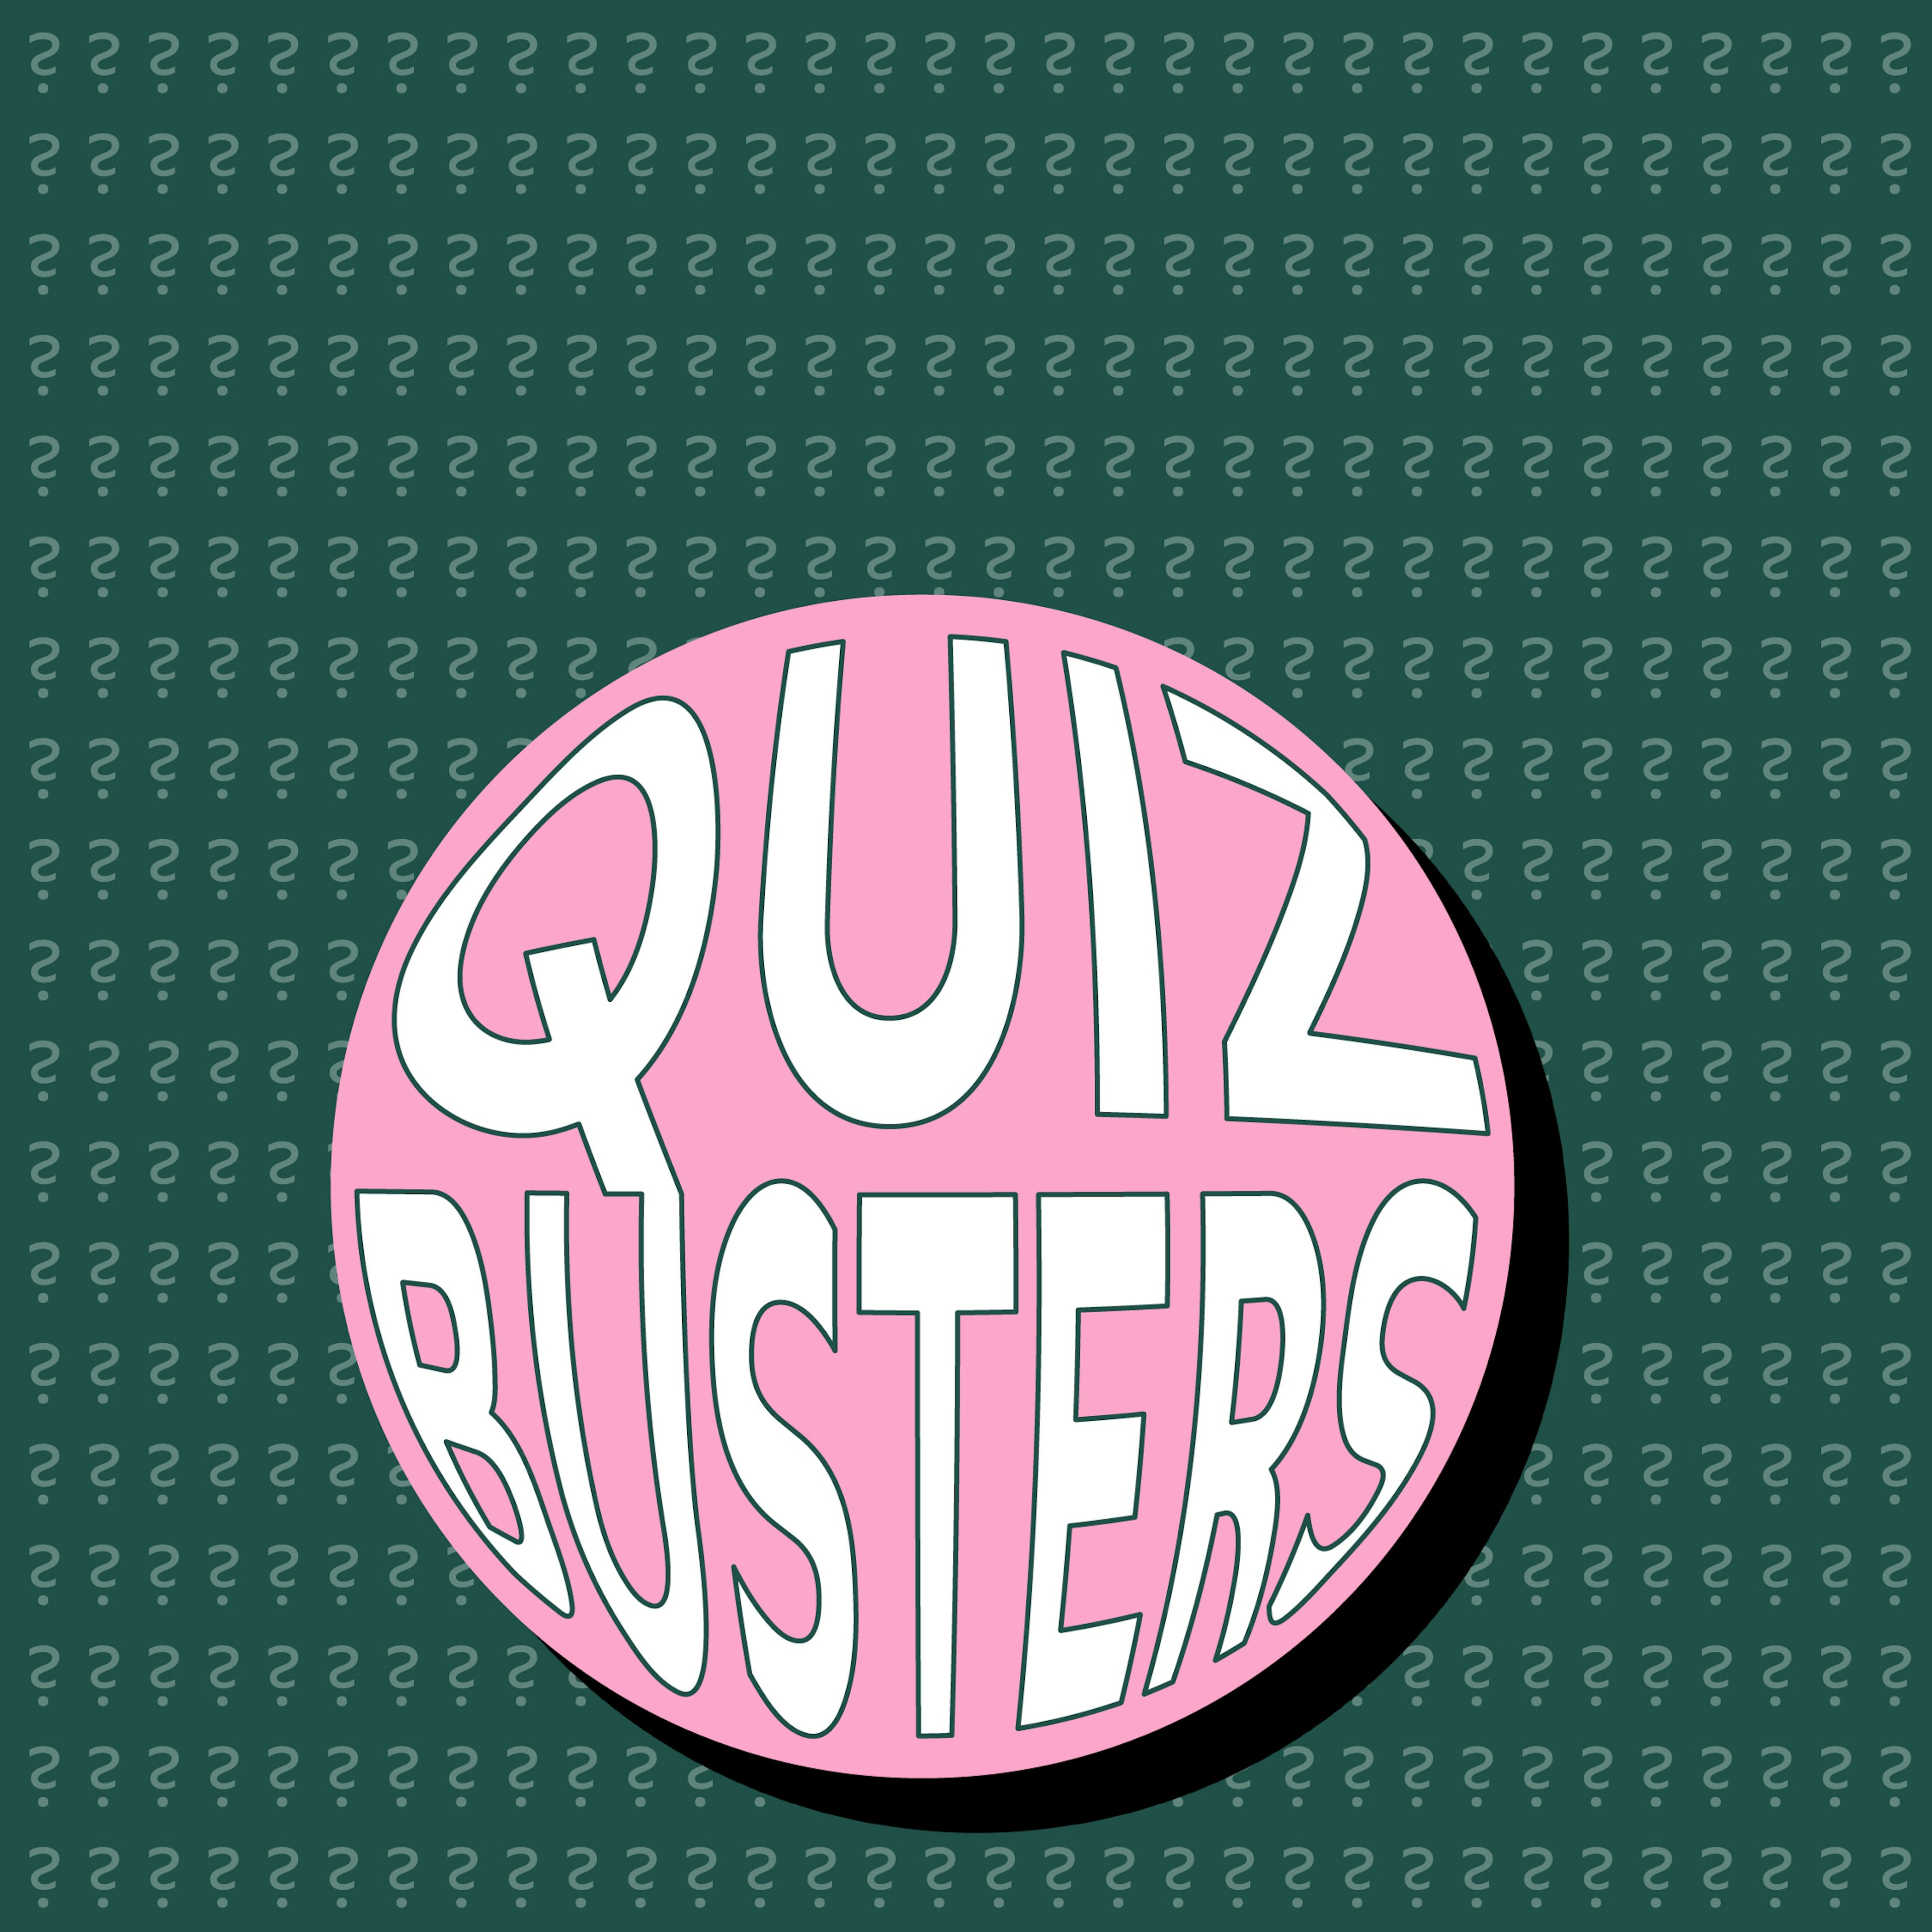 QUIZBUSTERS